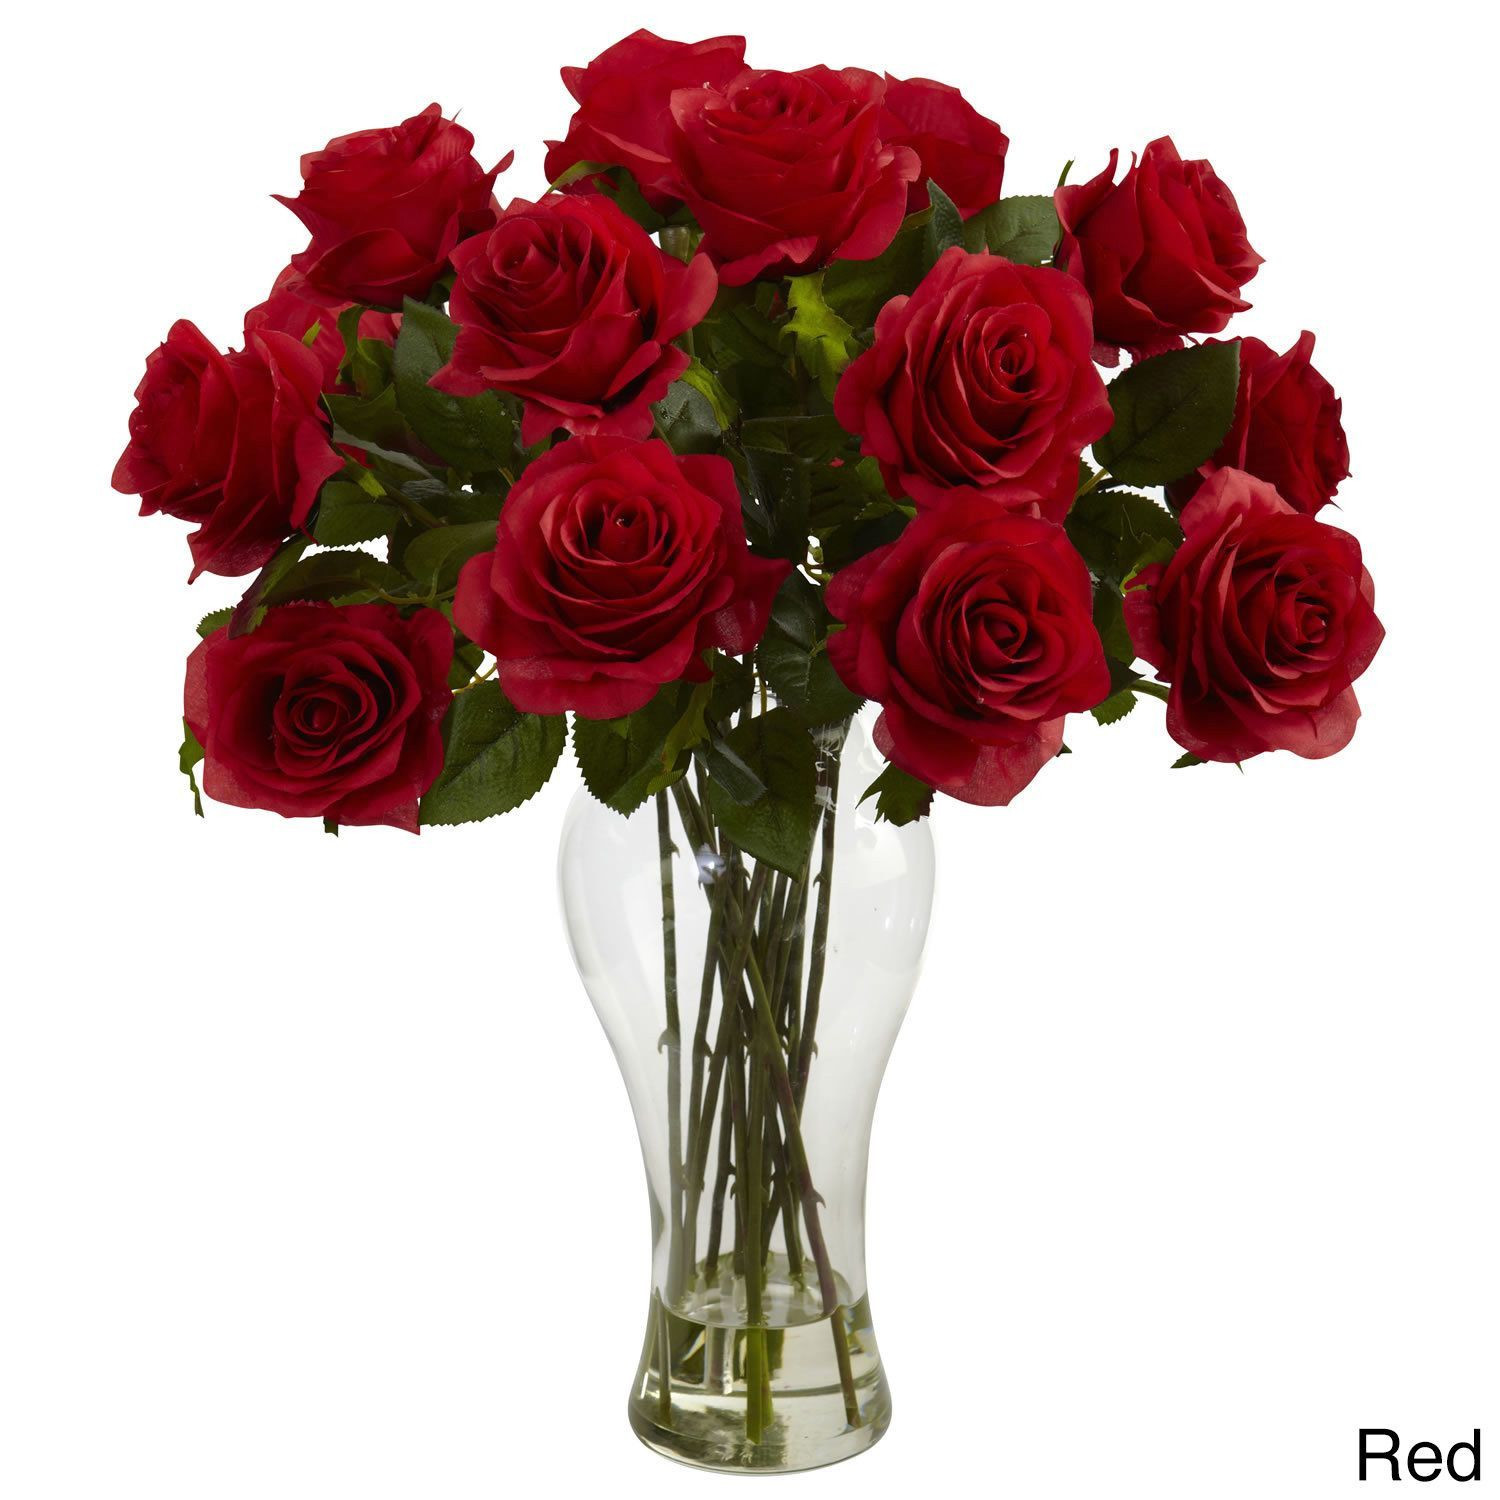 11 Great Artificial Red Roses In Vase 2024 free download artificial red roses in vase of nearly natural blooming roses vase blooming roses w vase red pertaining to nearly natural blooming roses vase blooming roses w vase red plastic